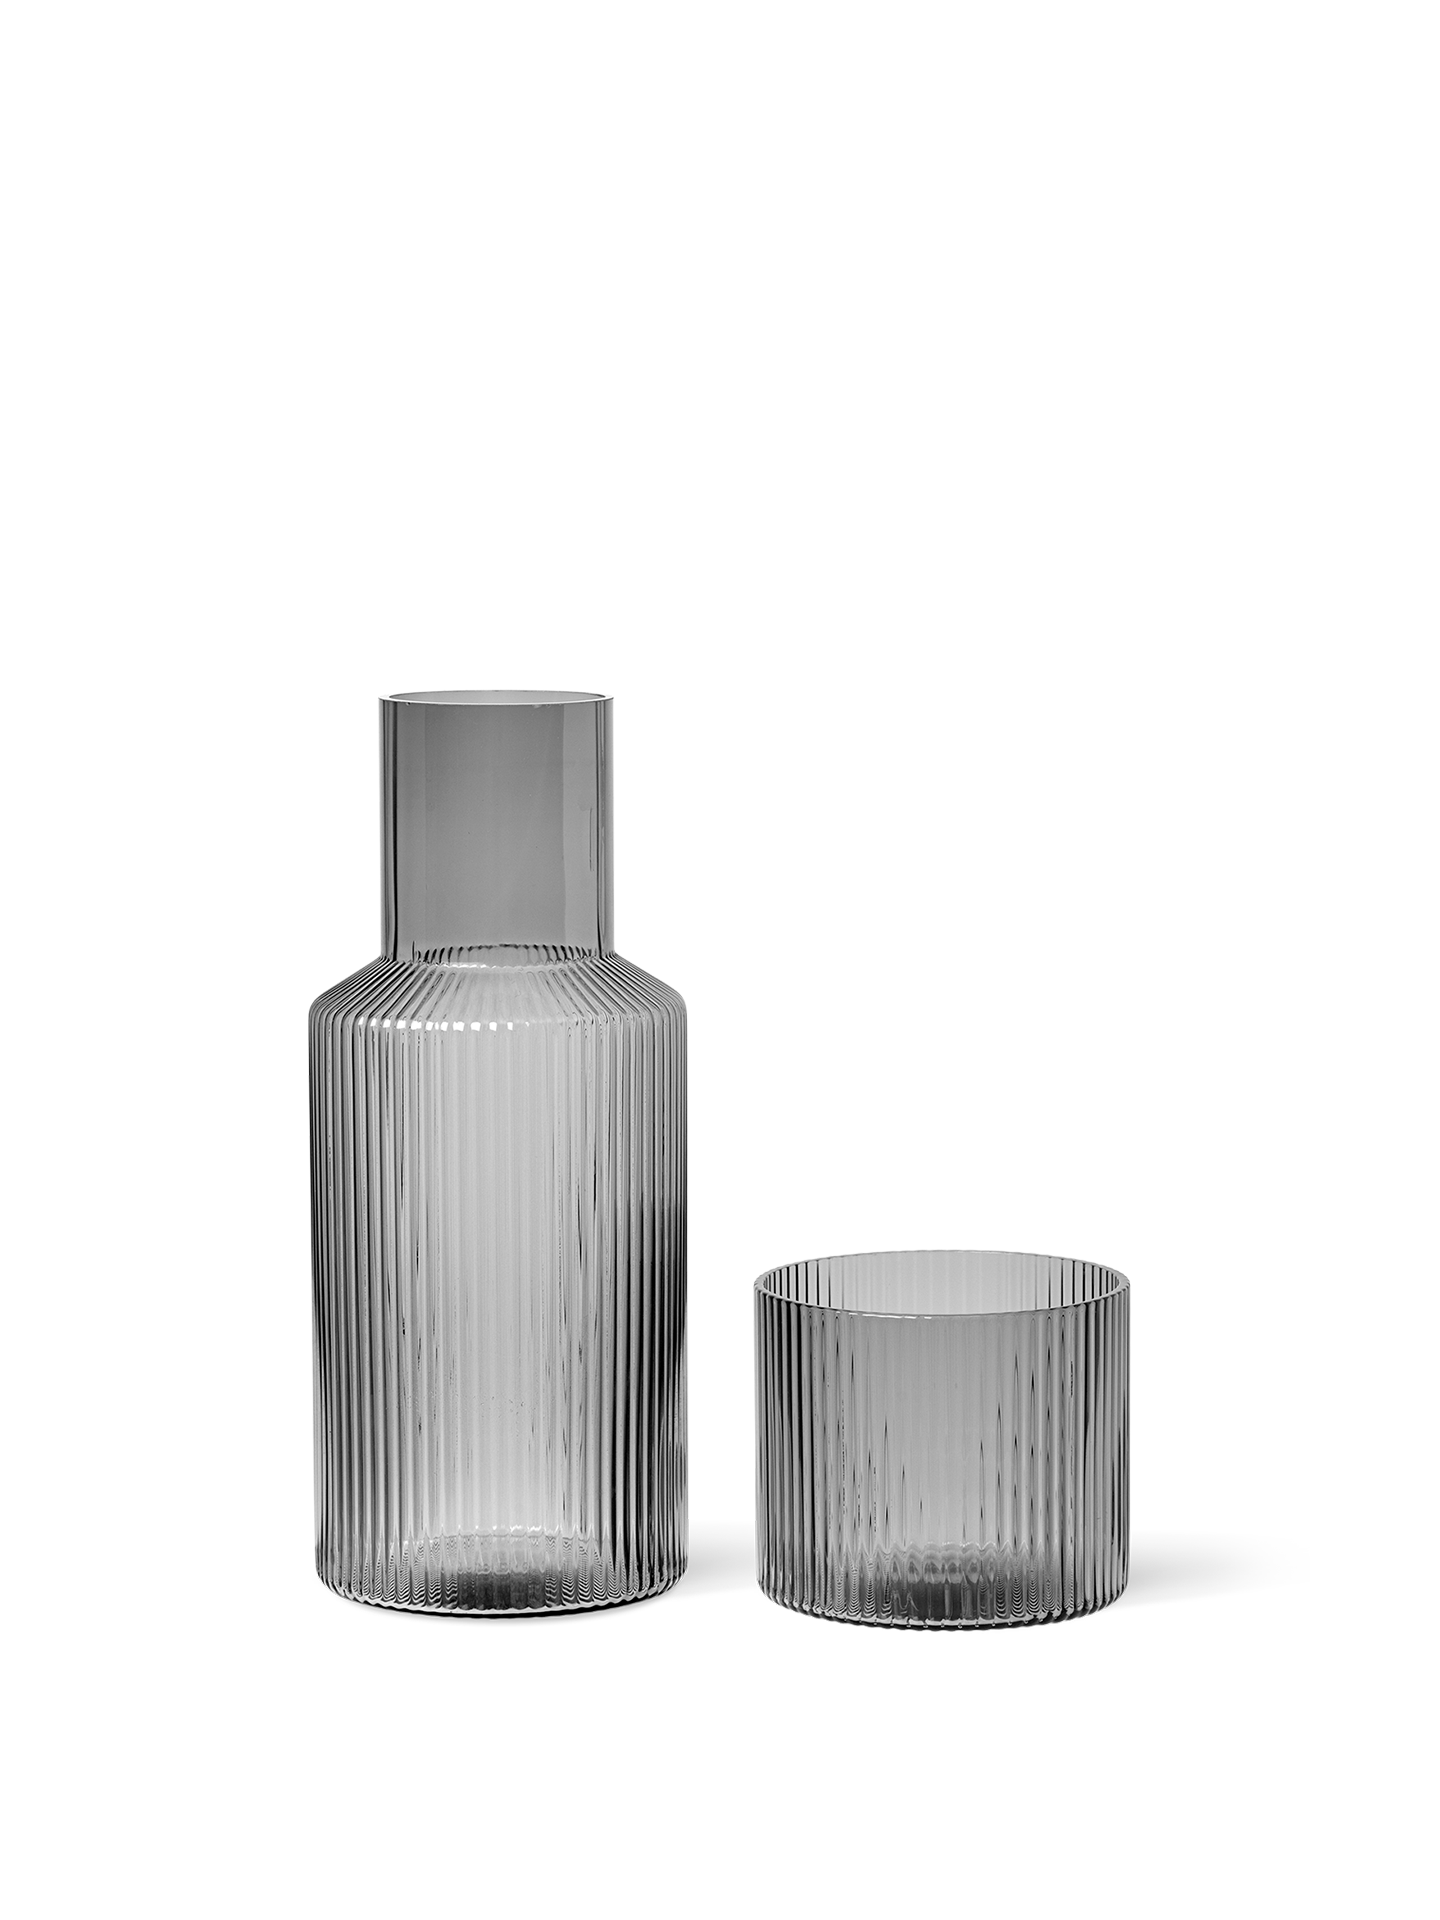 Ripple small carafe and glass, clear or smoked grey